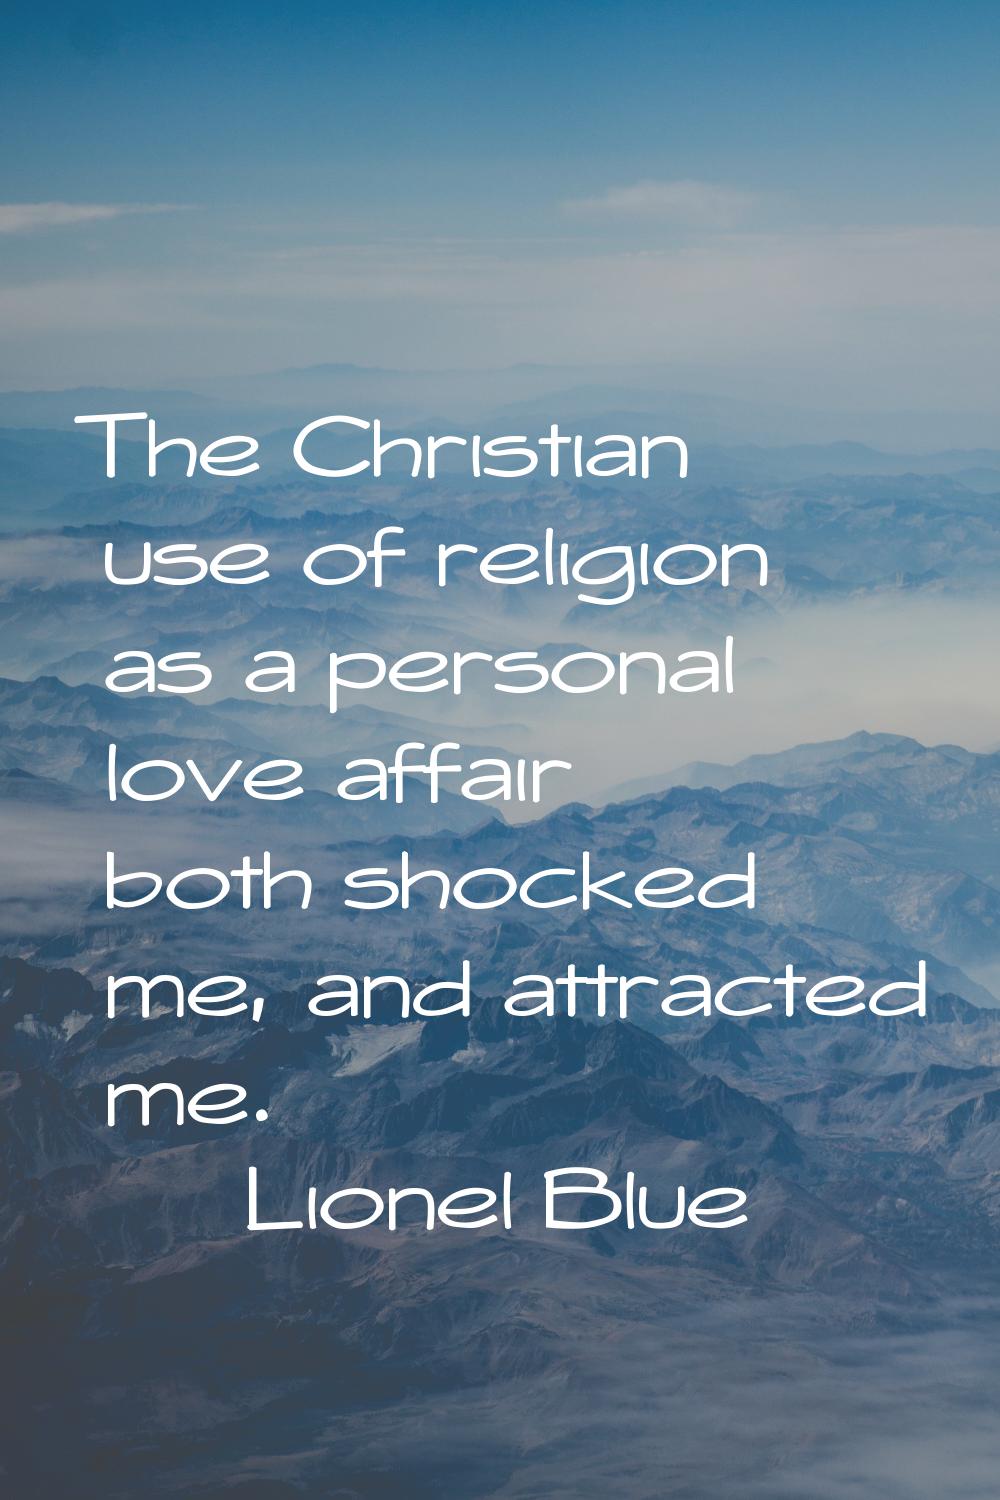 The Christian use of religion as a personal love affair both shocked me, and attracted me.